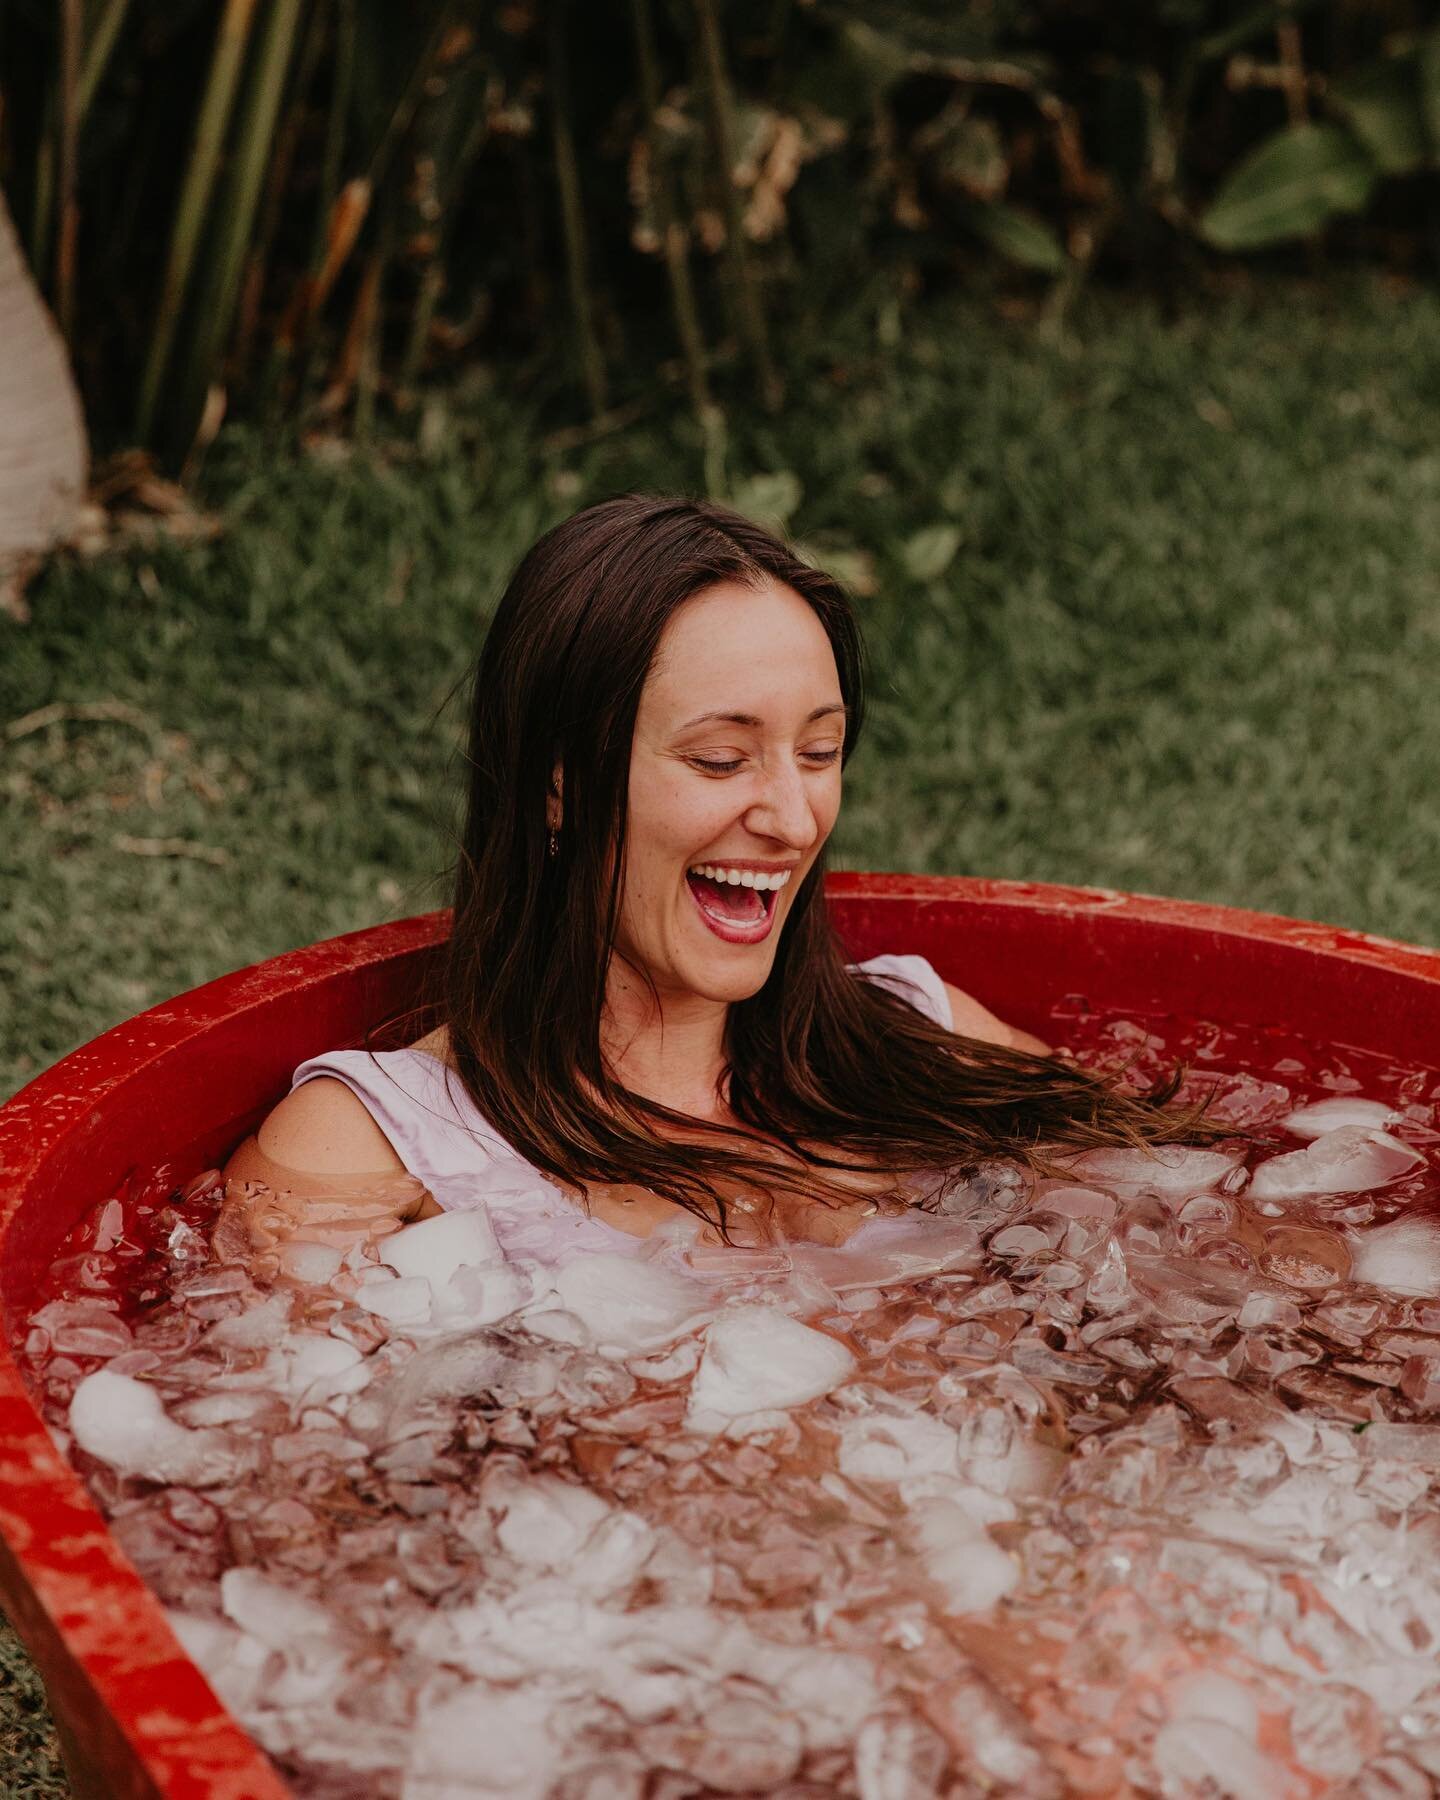 5 Benefits of an Ice Bath Experience: 

1- Ice baths can help your muscles recover after a hard workout or practice. 
2- It can improve sleep.
3- It can boost your mental health. 
4- It can work as an immunity booster. 
5 -It can help with skin probl